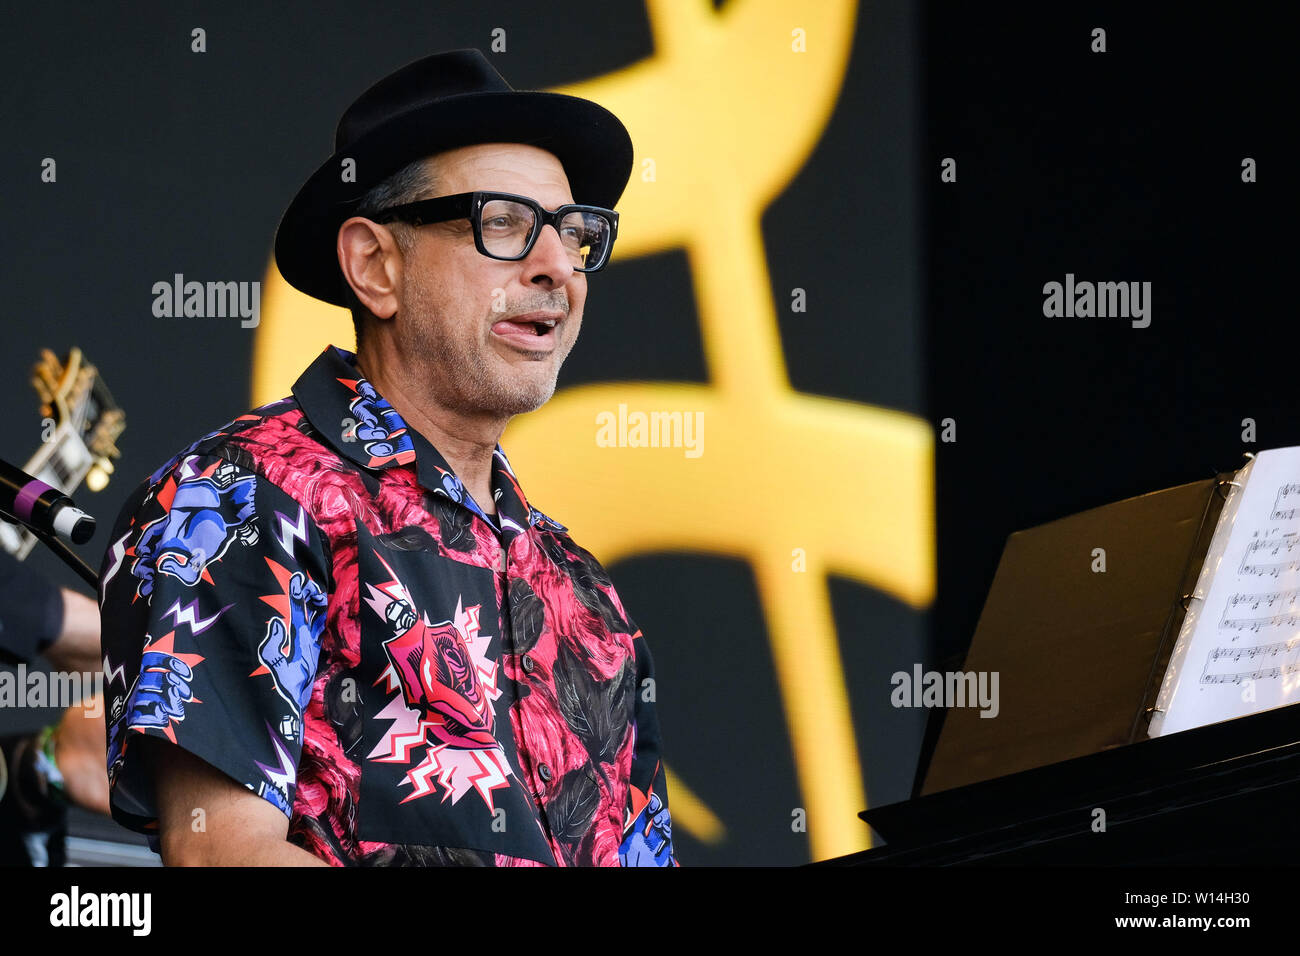 Pilton, Somerset, UK. 30th June, 2019. Pilton, Somerset, UK. 30th June, 2019. Jeff Goldblum & the Mildred Snitzer Orchestra performs on the West Holts stage at Glastonbury Festival 2019 on Sunday 30 June 2019 at Worthy Farm, Pilton. Jeff Goldblum. Picture by Credit: Julie Edwards/Alamy Live News Credit: Julie Edwards/Alamy Live News Stock Photo